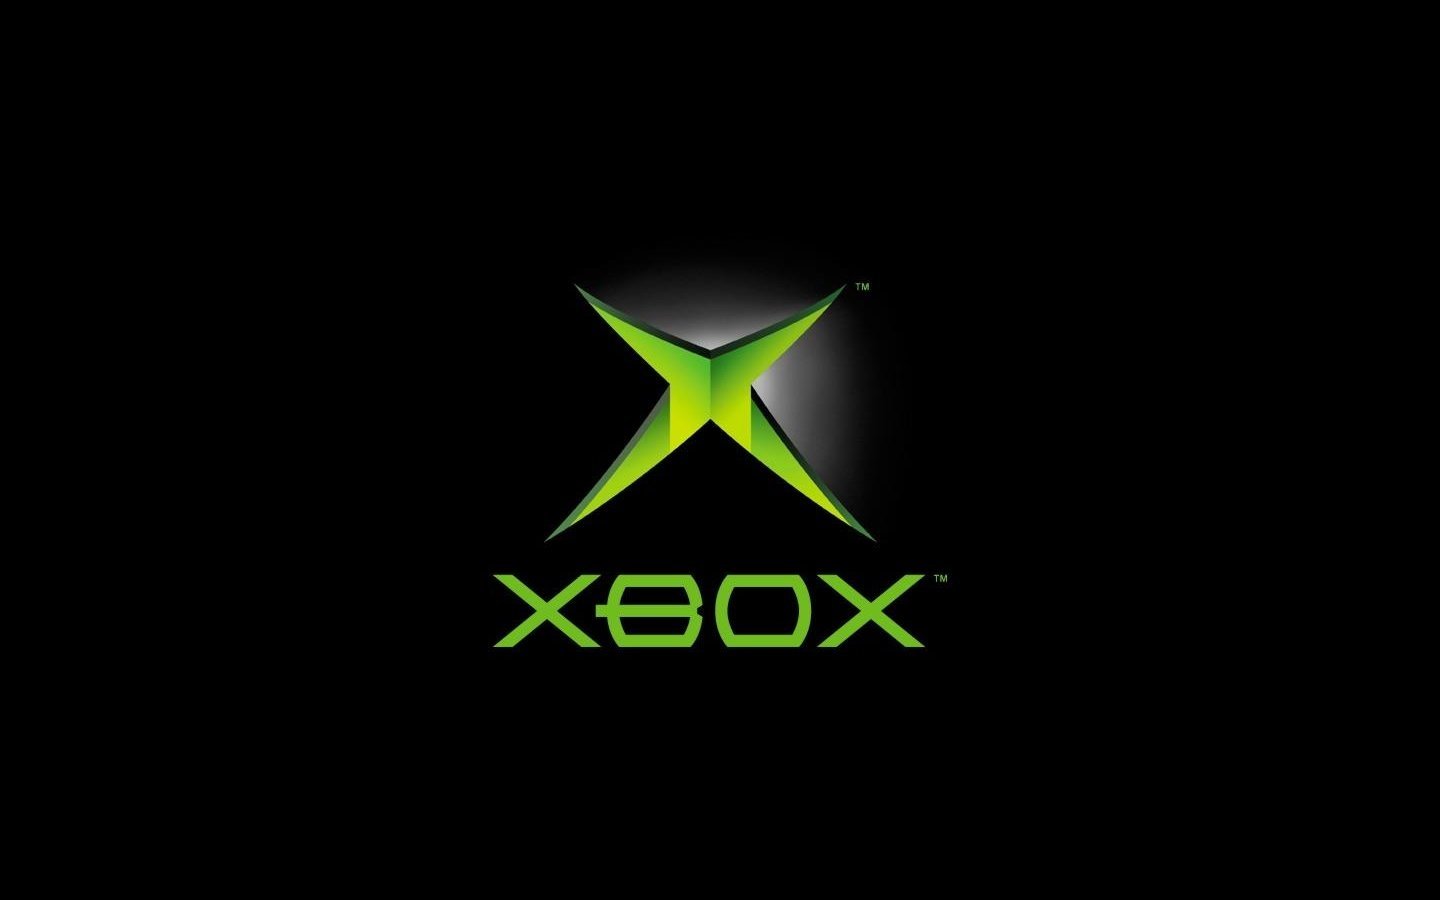 Xbox Wallpaper wallpaper by LegacyXX69  Download on ZEDGE  1f7a